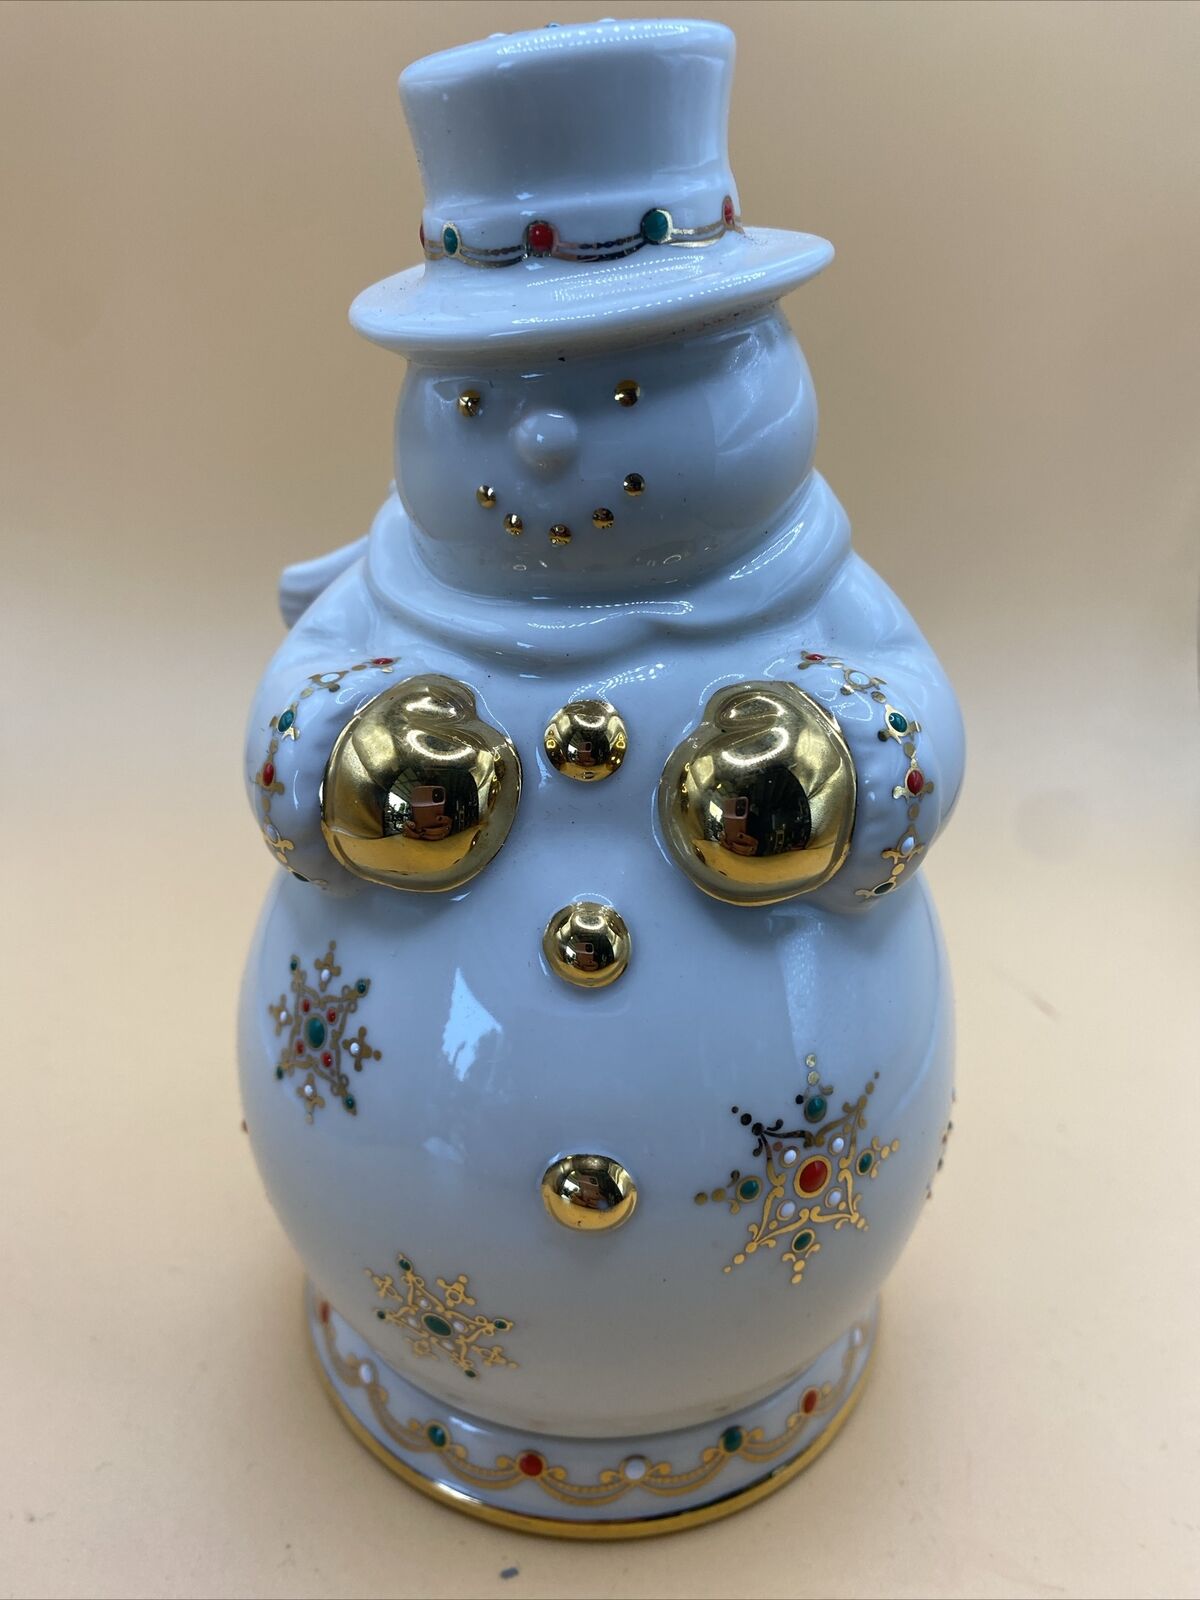 Lenox Snowman Candle Holder China Jewels Cozy Lite Snowman Holiday Collectible 